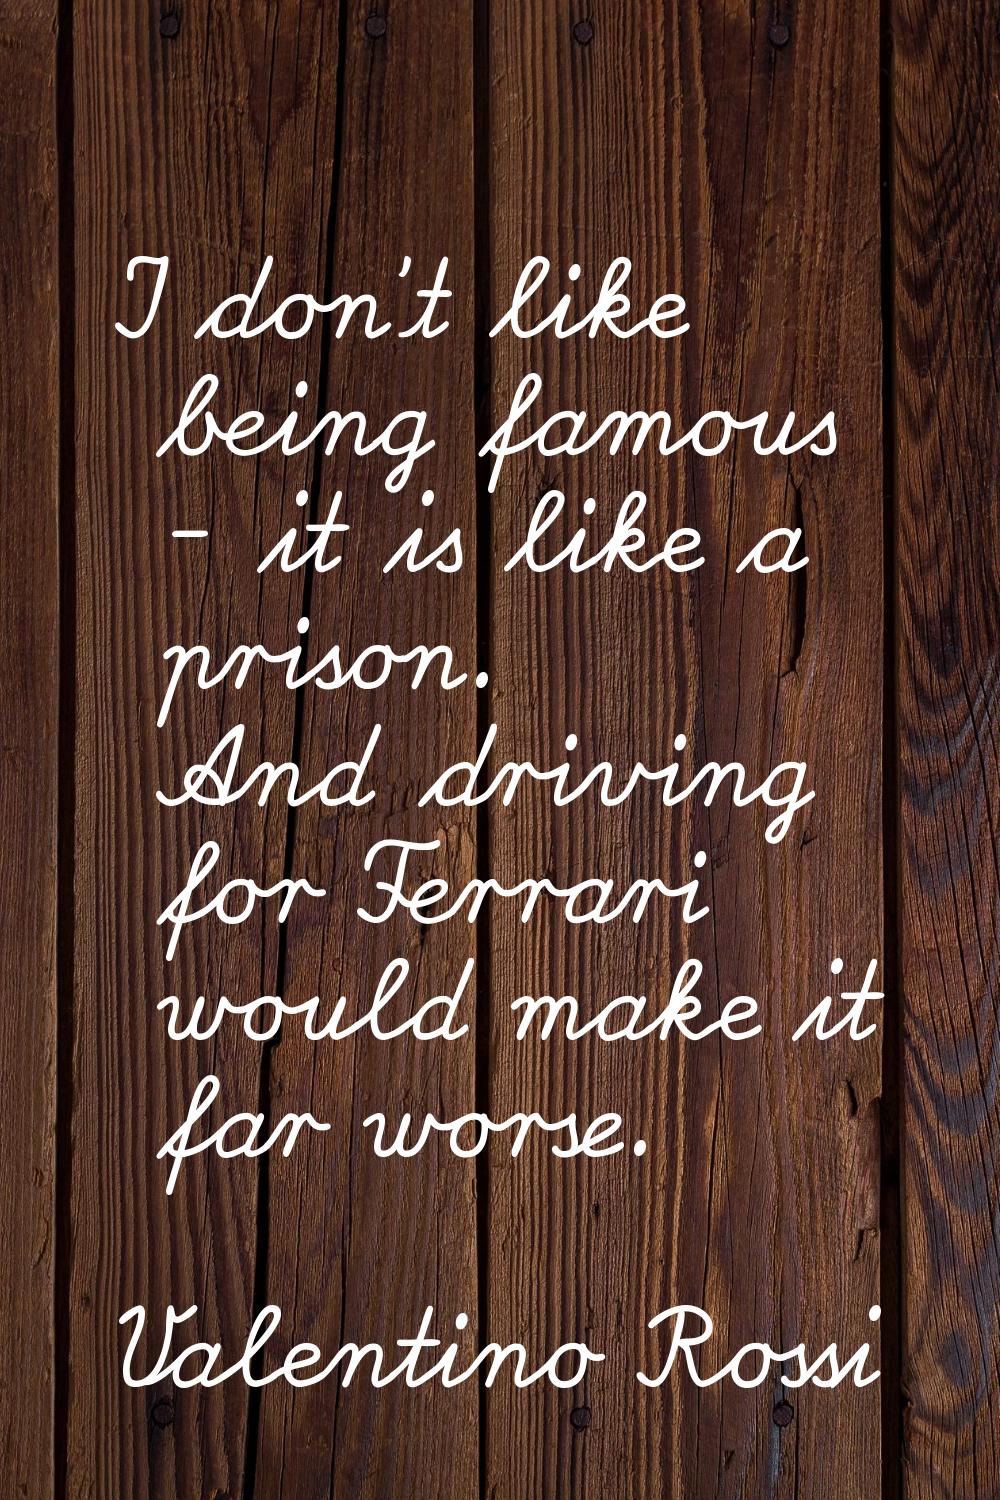 I don't like being famous - it is like a prison. And driving for Ferrari would make it far worse.